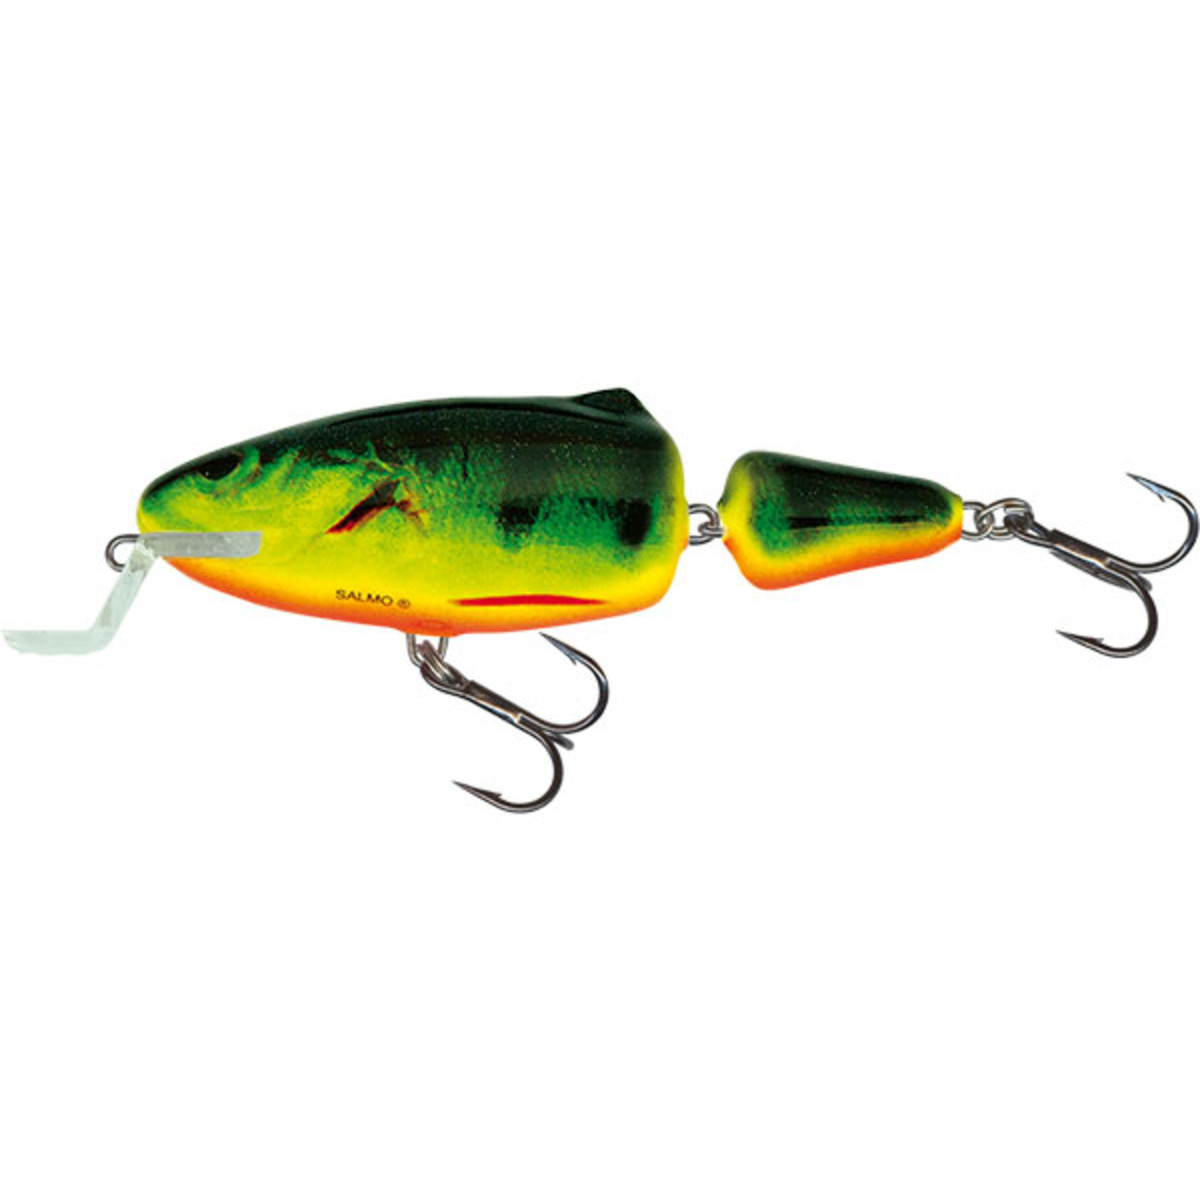 Salmo Frisky Shallow Runner 5 Cm - Real Hot Perch